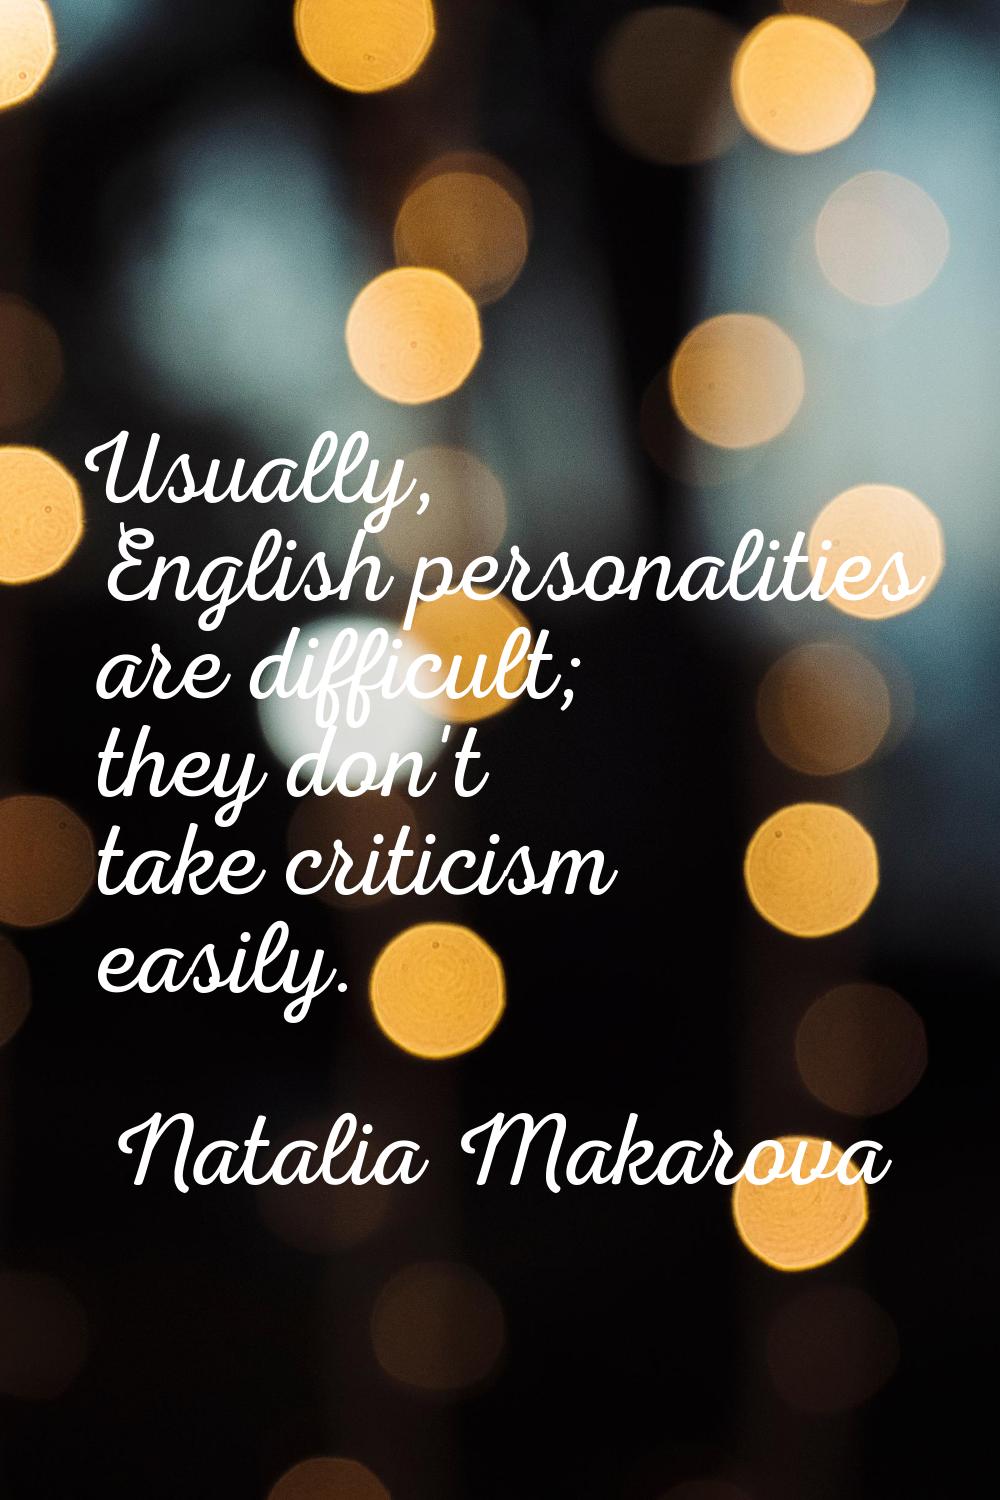 Usually, English personalities are difficult; they don't take criticism easily.